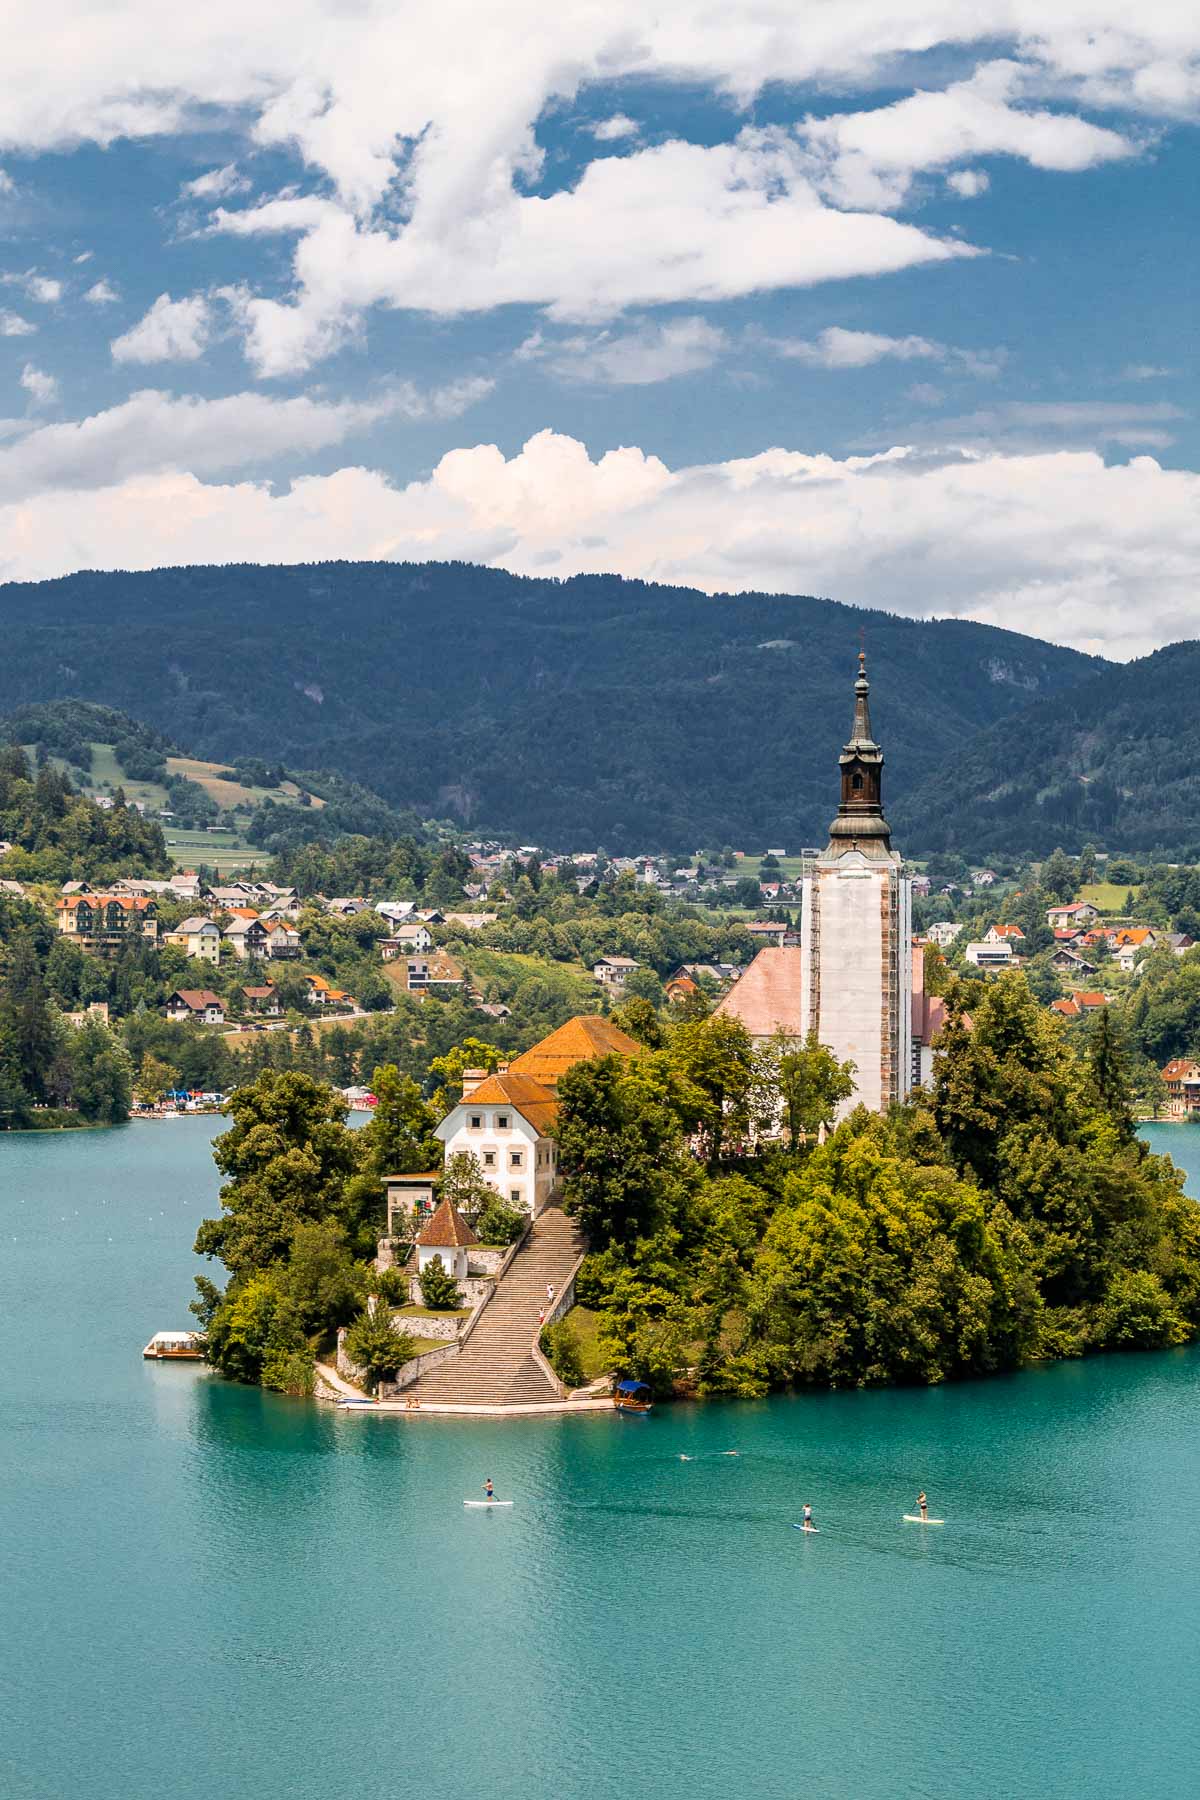 Island in the middle of Lake Bled, Slovenia